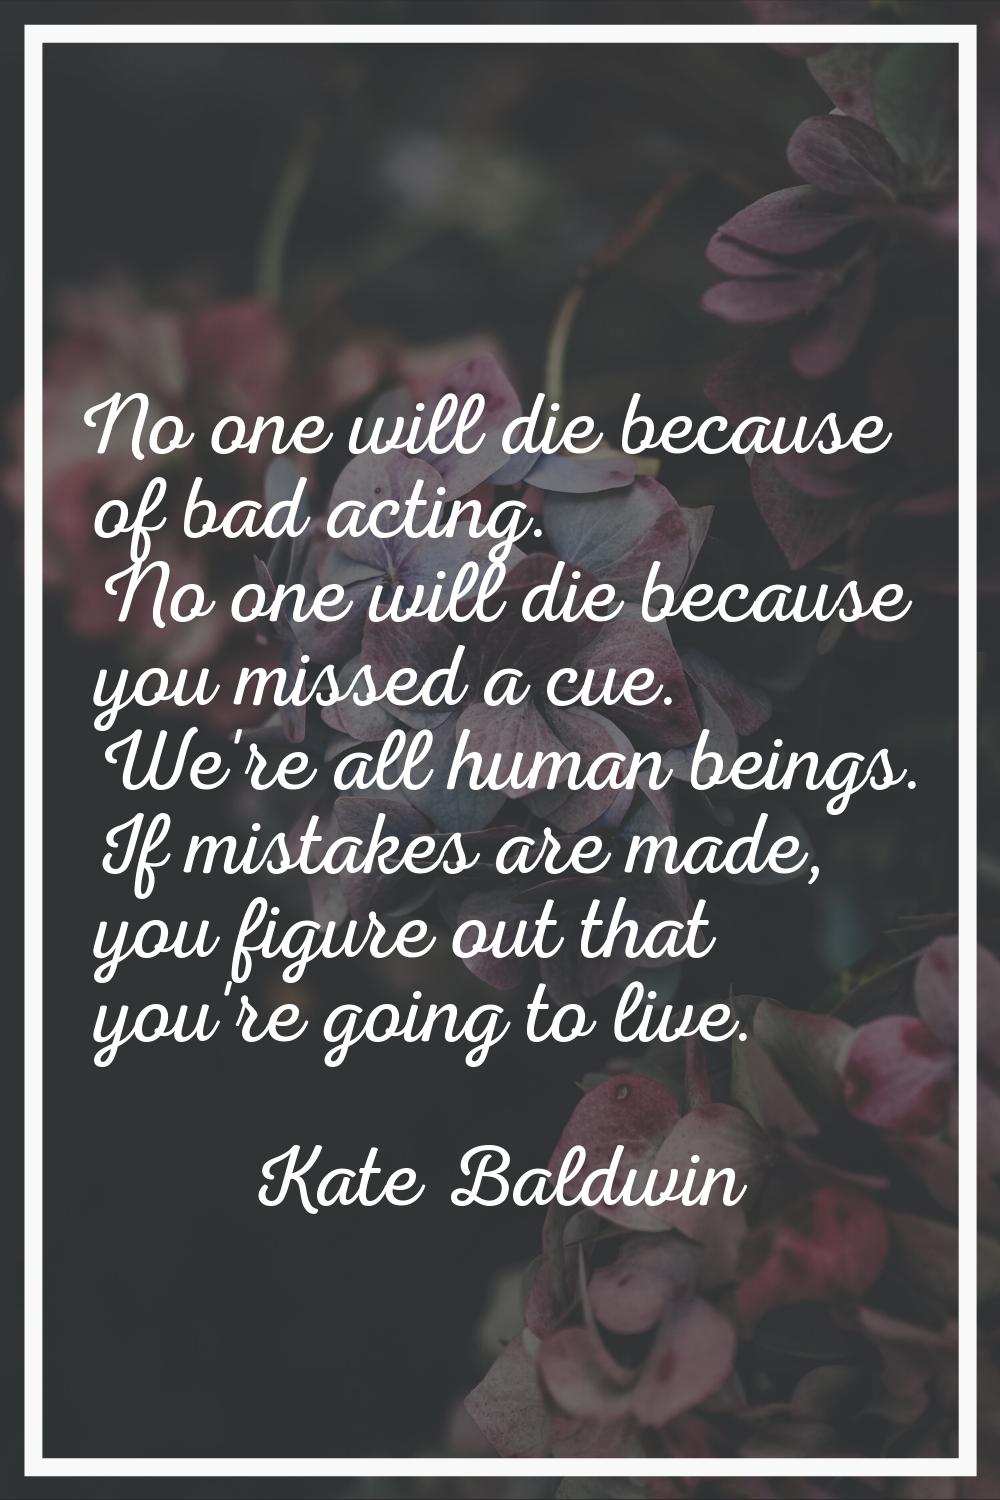 No one will die because of bad acting. No one will die because you missed a cue. We're all human be